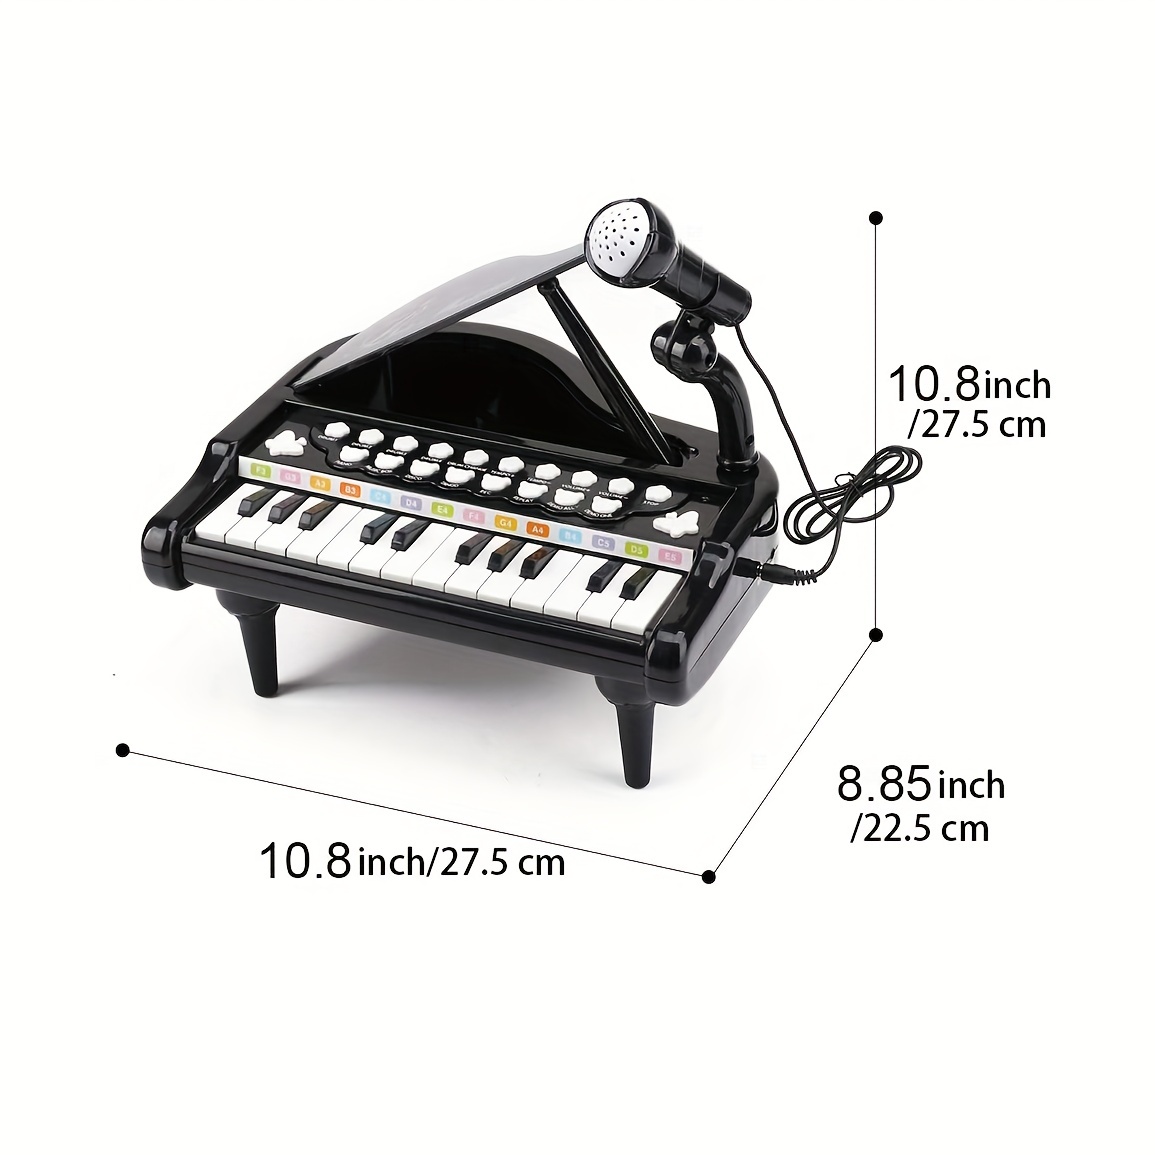 Toy Piano Piano Keyboard Toy For Girls Kids Birthday Gift Toys For 1 2 3 4  Years Old-- Multi-functional, With Microphone, Portable, Mini, 24 Keys